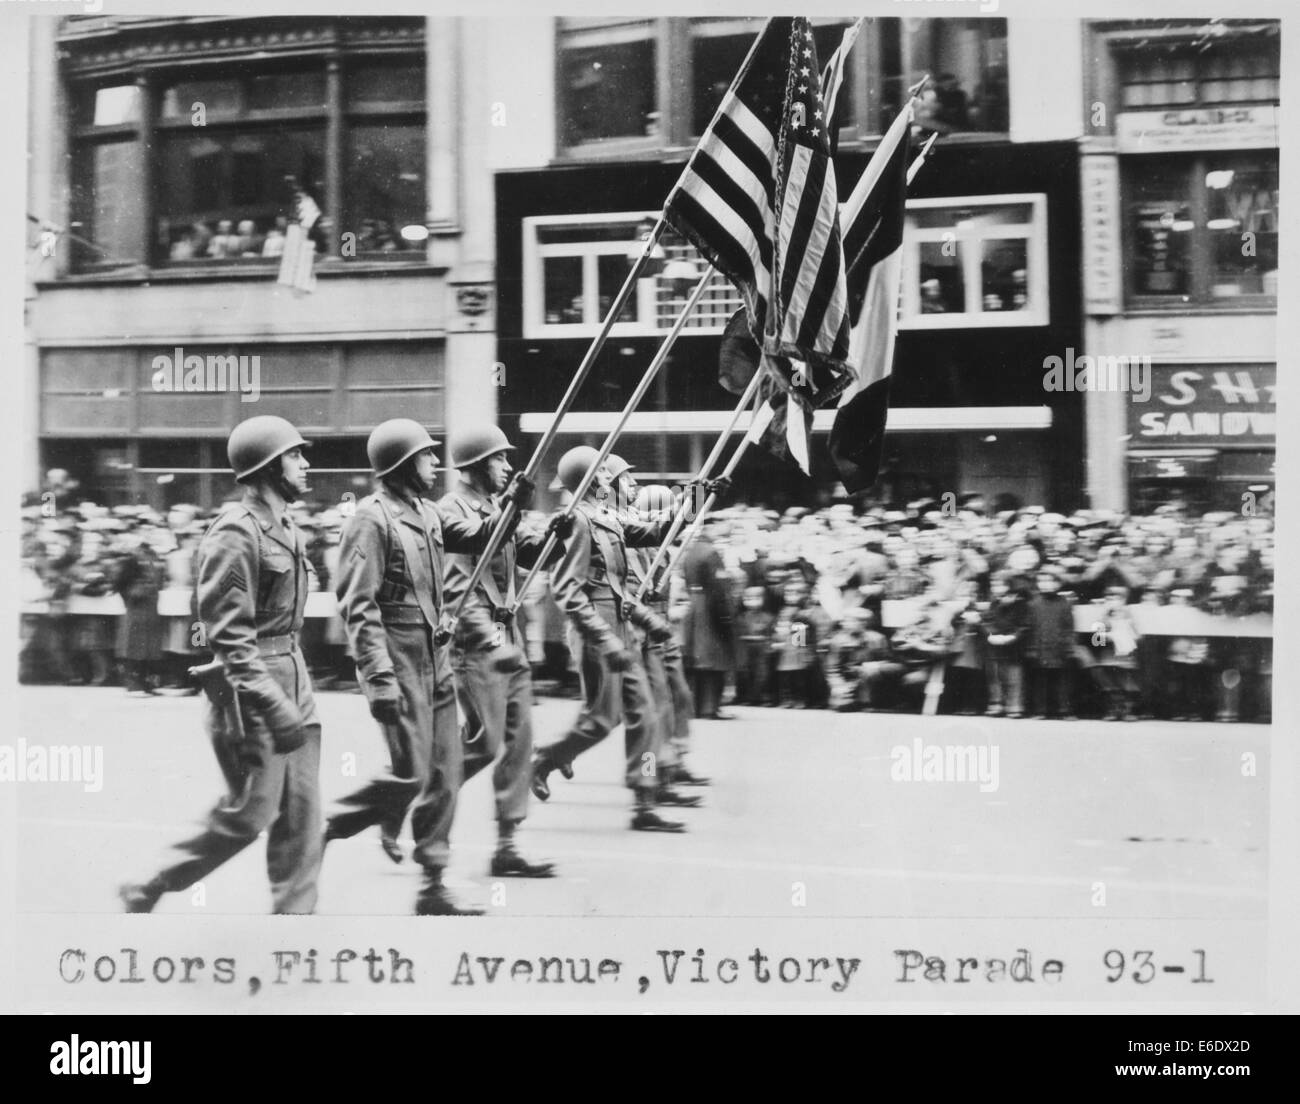 Row of Soldiers Marching with Flags During Victory Parade on Fifth Avenue, New York City, USA, 1946 Stock Photo